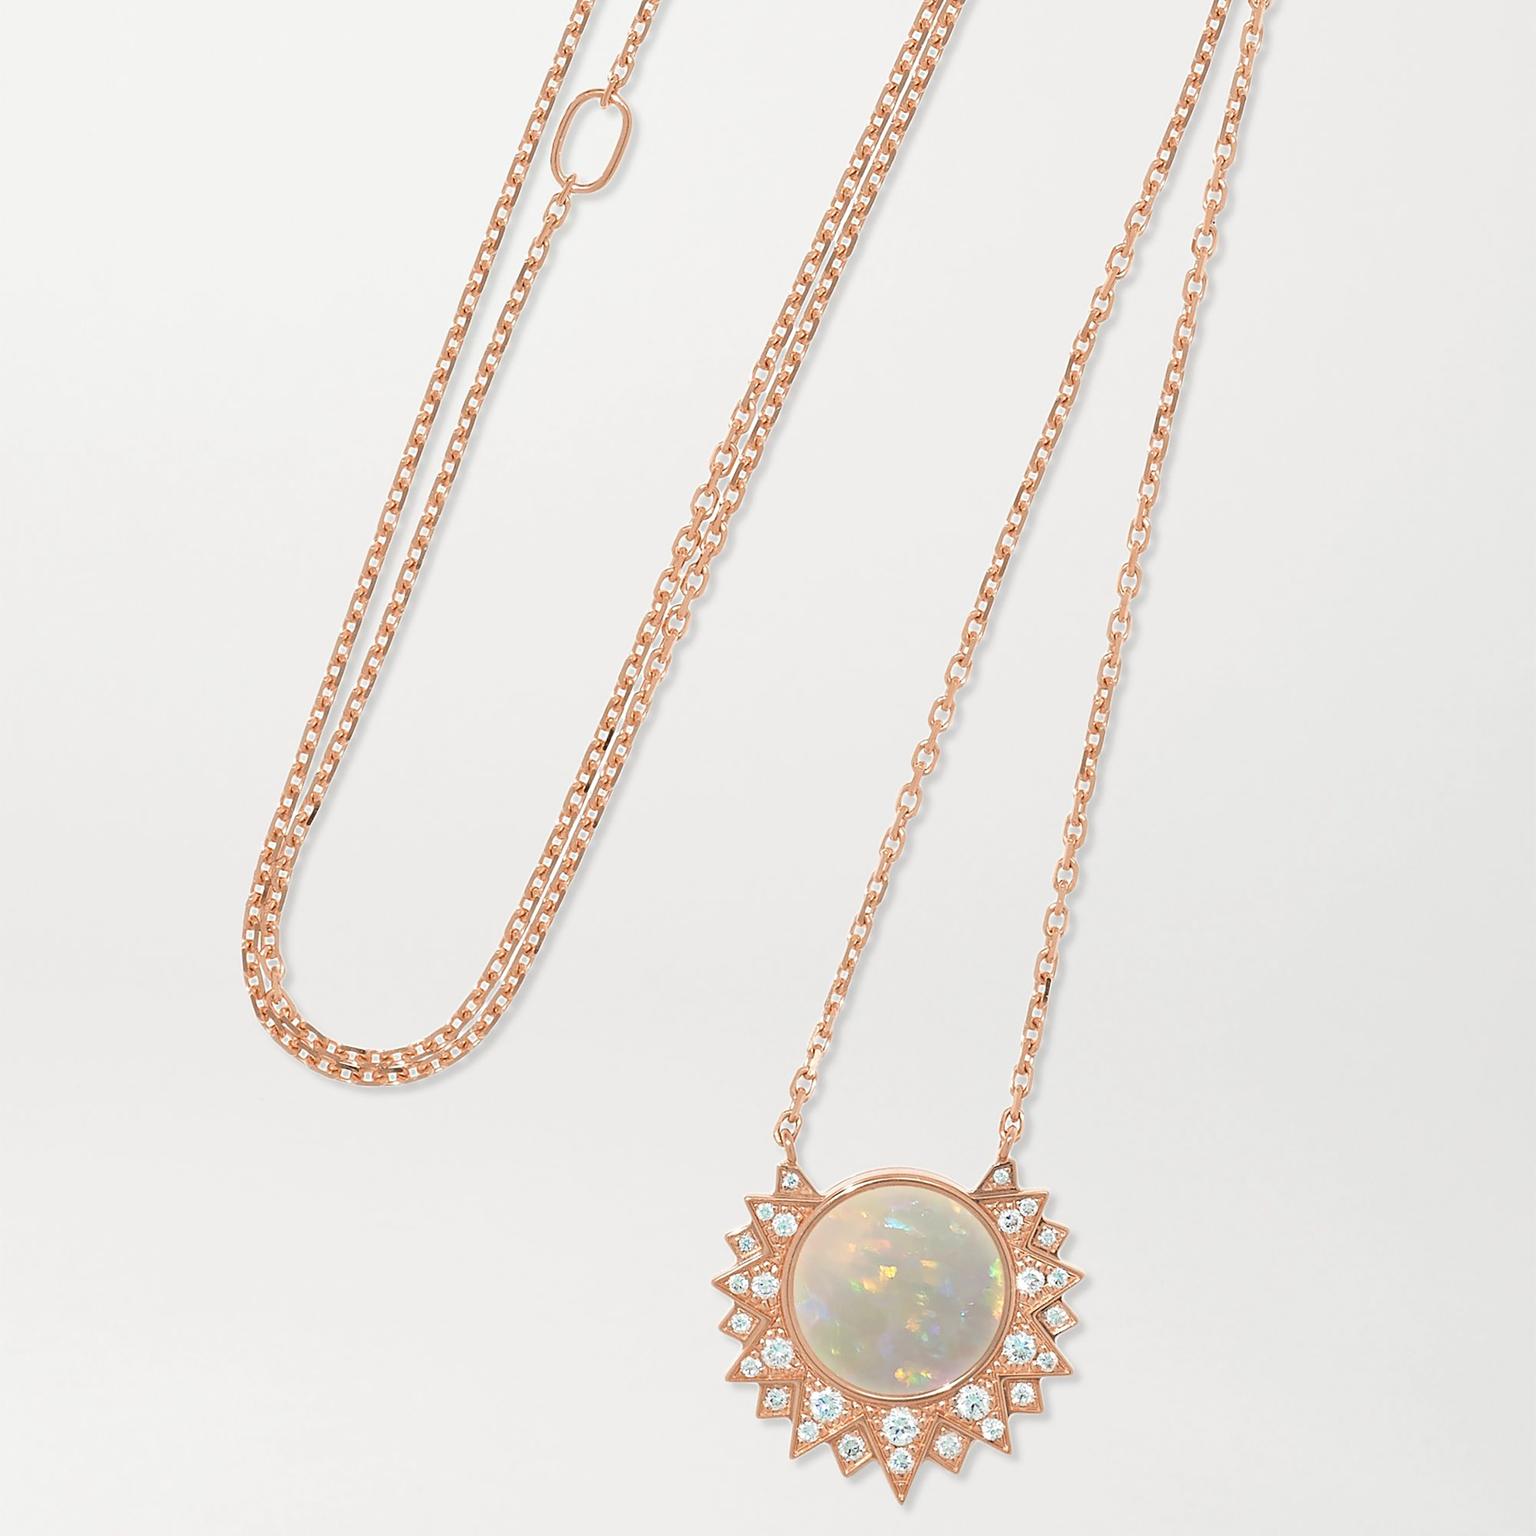 Sunlight opal necklace by Piaget